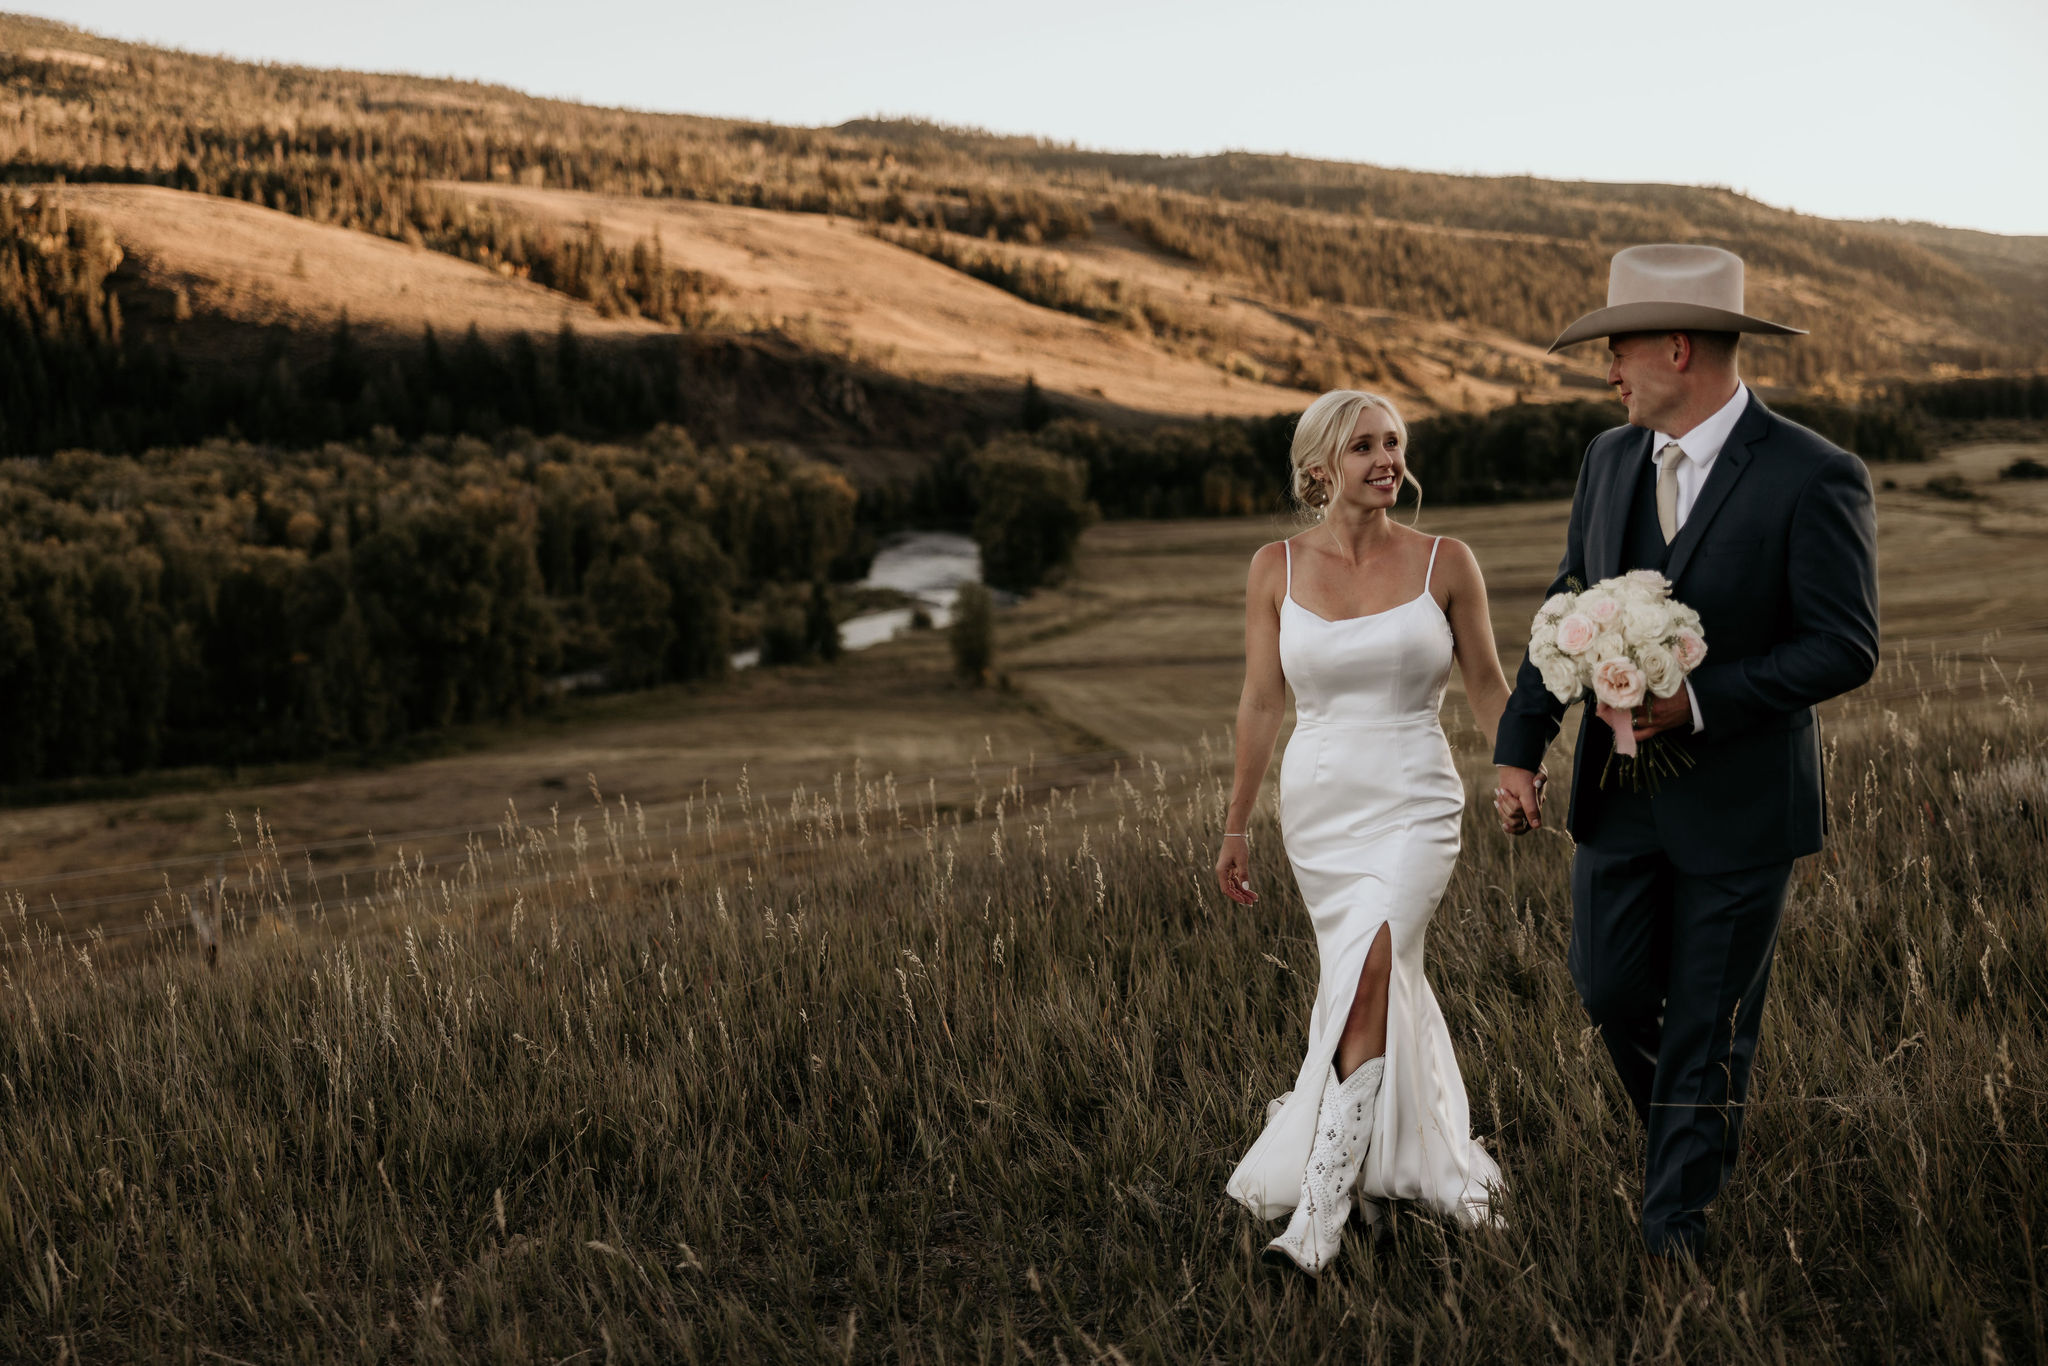 bride and groom walk in field during stress free wedding day in colorado.